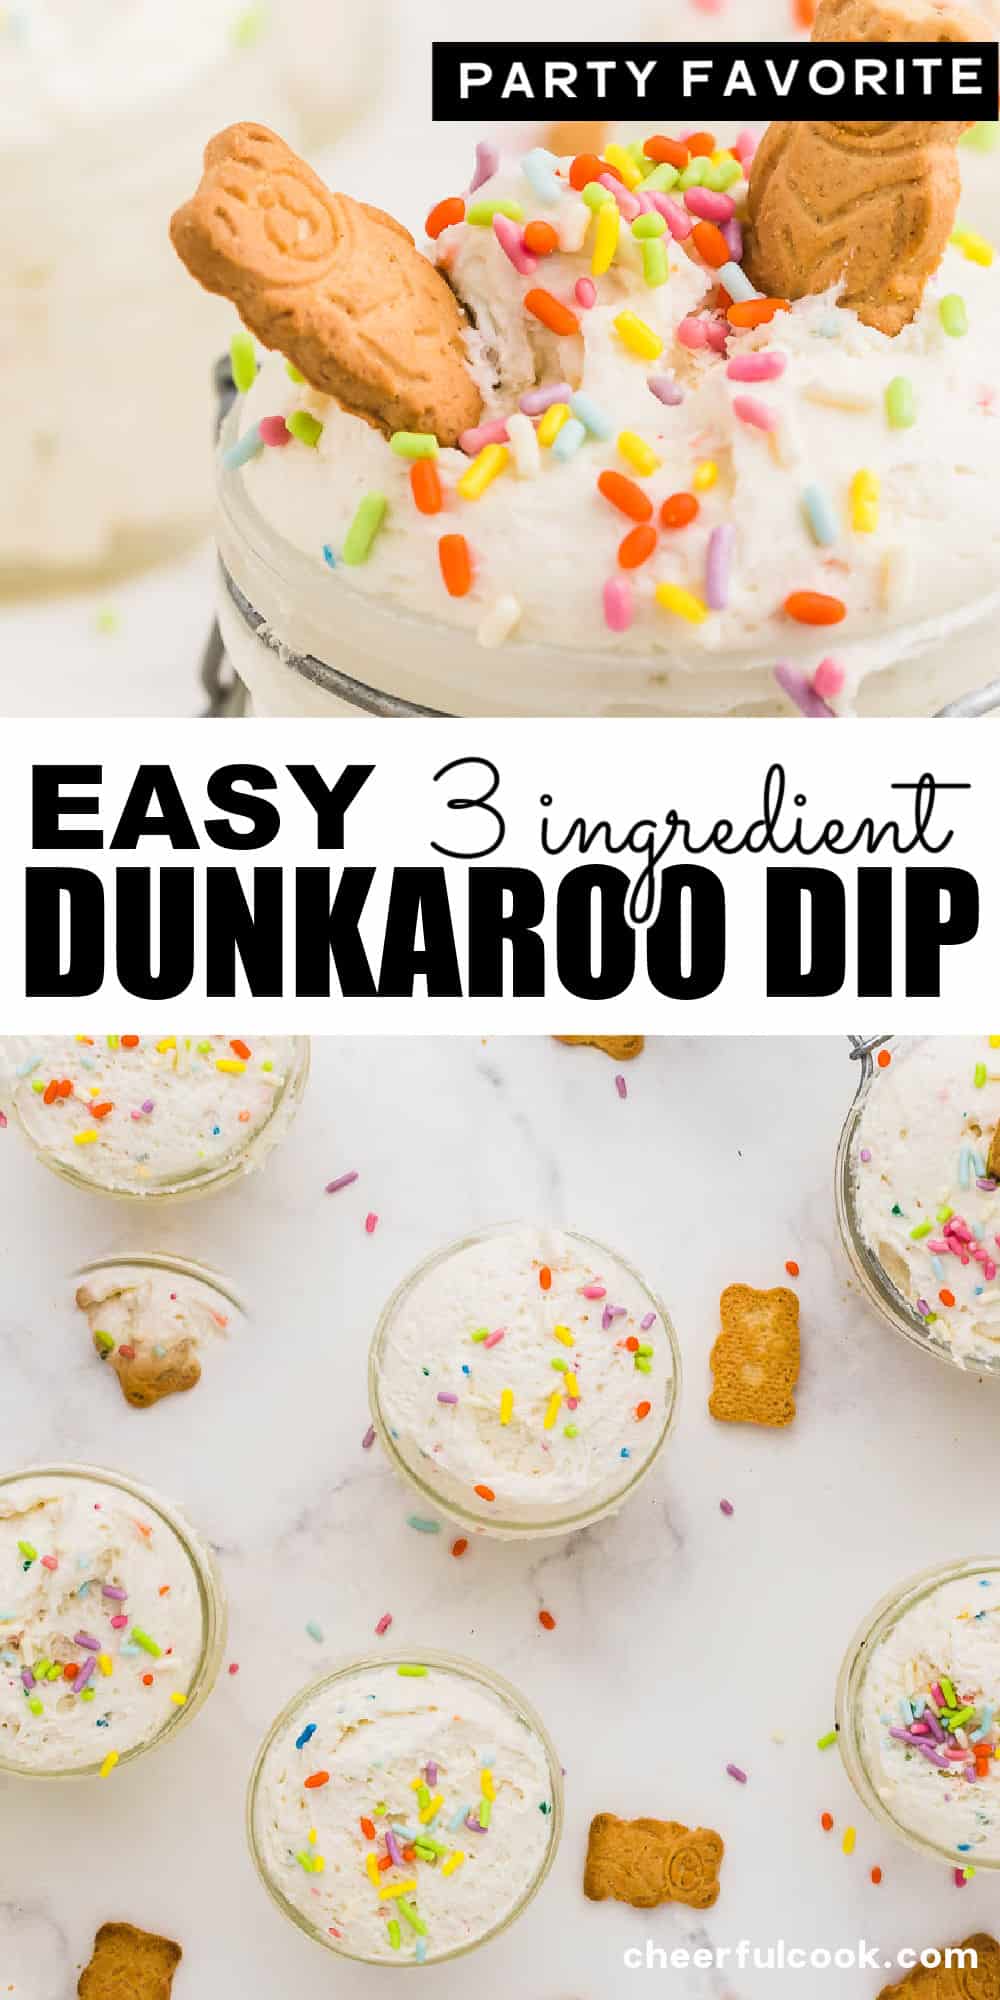 If you’re looking for an easy, homemade, no-bake, delicious dessert recipe, this Dunkaroo Dip for you. It’s a perfect last-minute dessert you can serve at any party. This recipe will take you just about 5 minutes to make. Easy Dunkraoo Dip Recipe | Cake Batter Dip For Parties | Funfetti Cake Batter Dip via @cheerfulcook